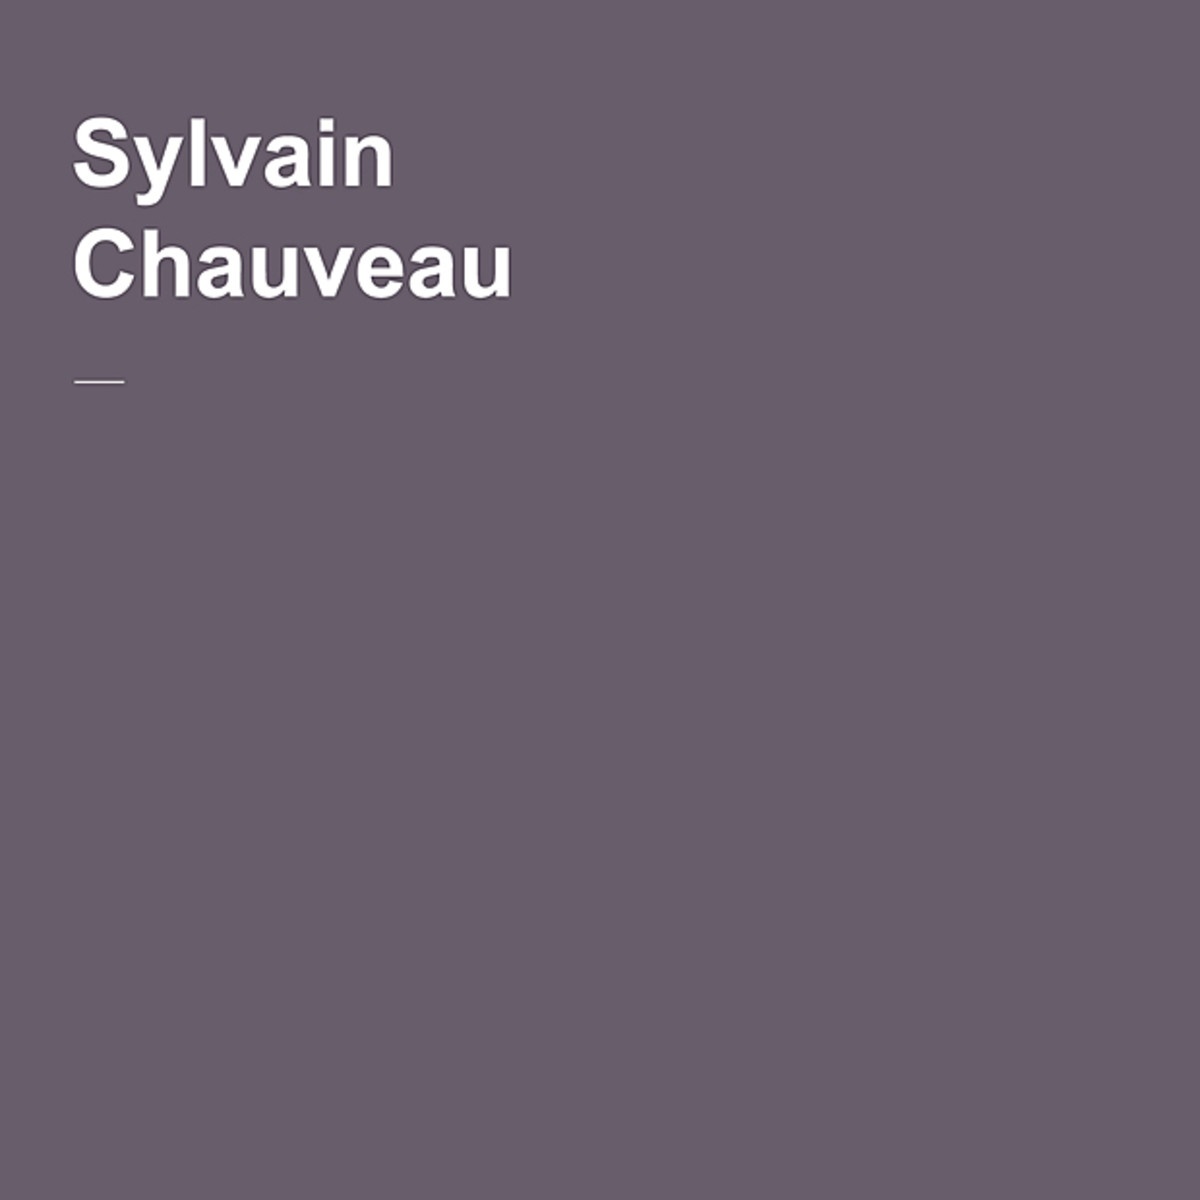 High in the Morning (Sylvain Chauveau Remix)